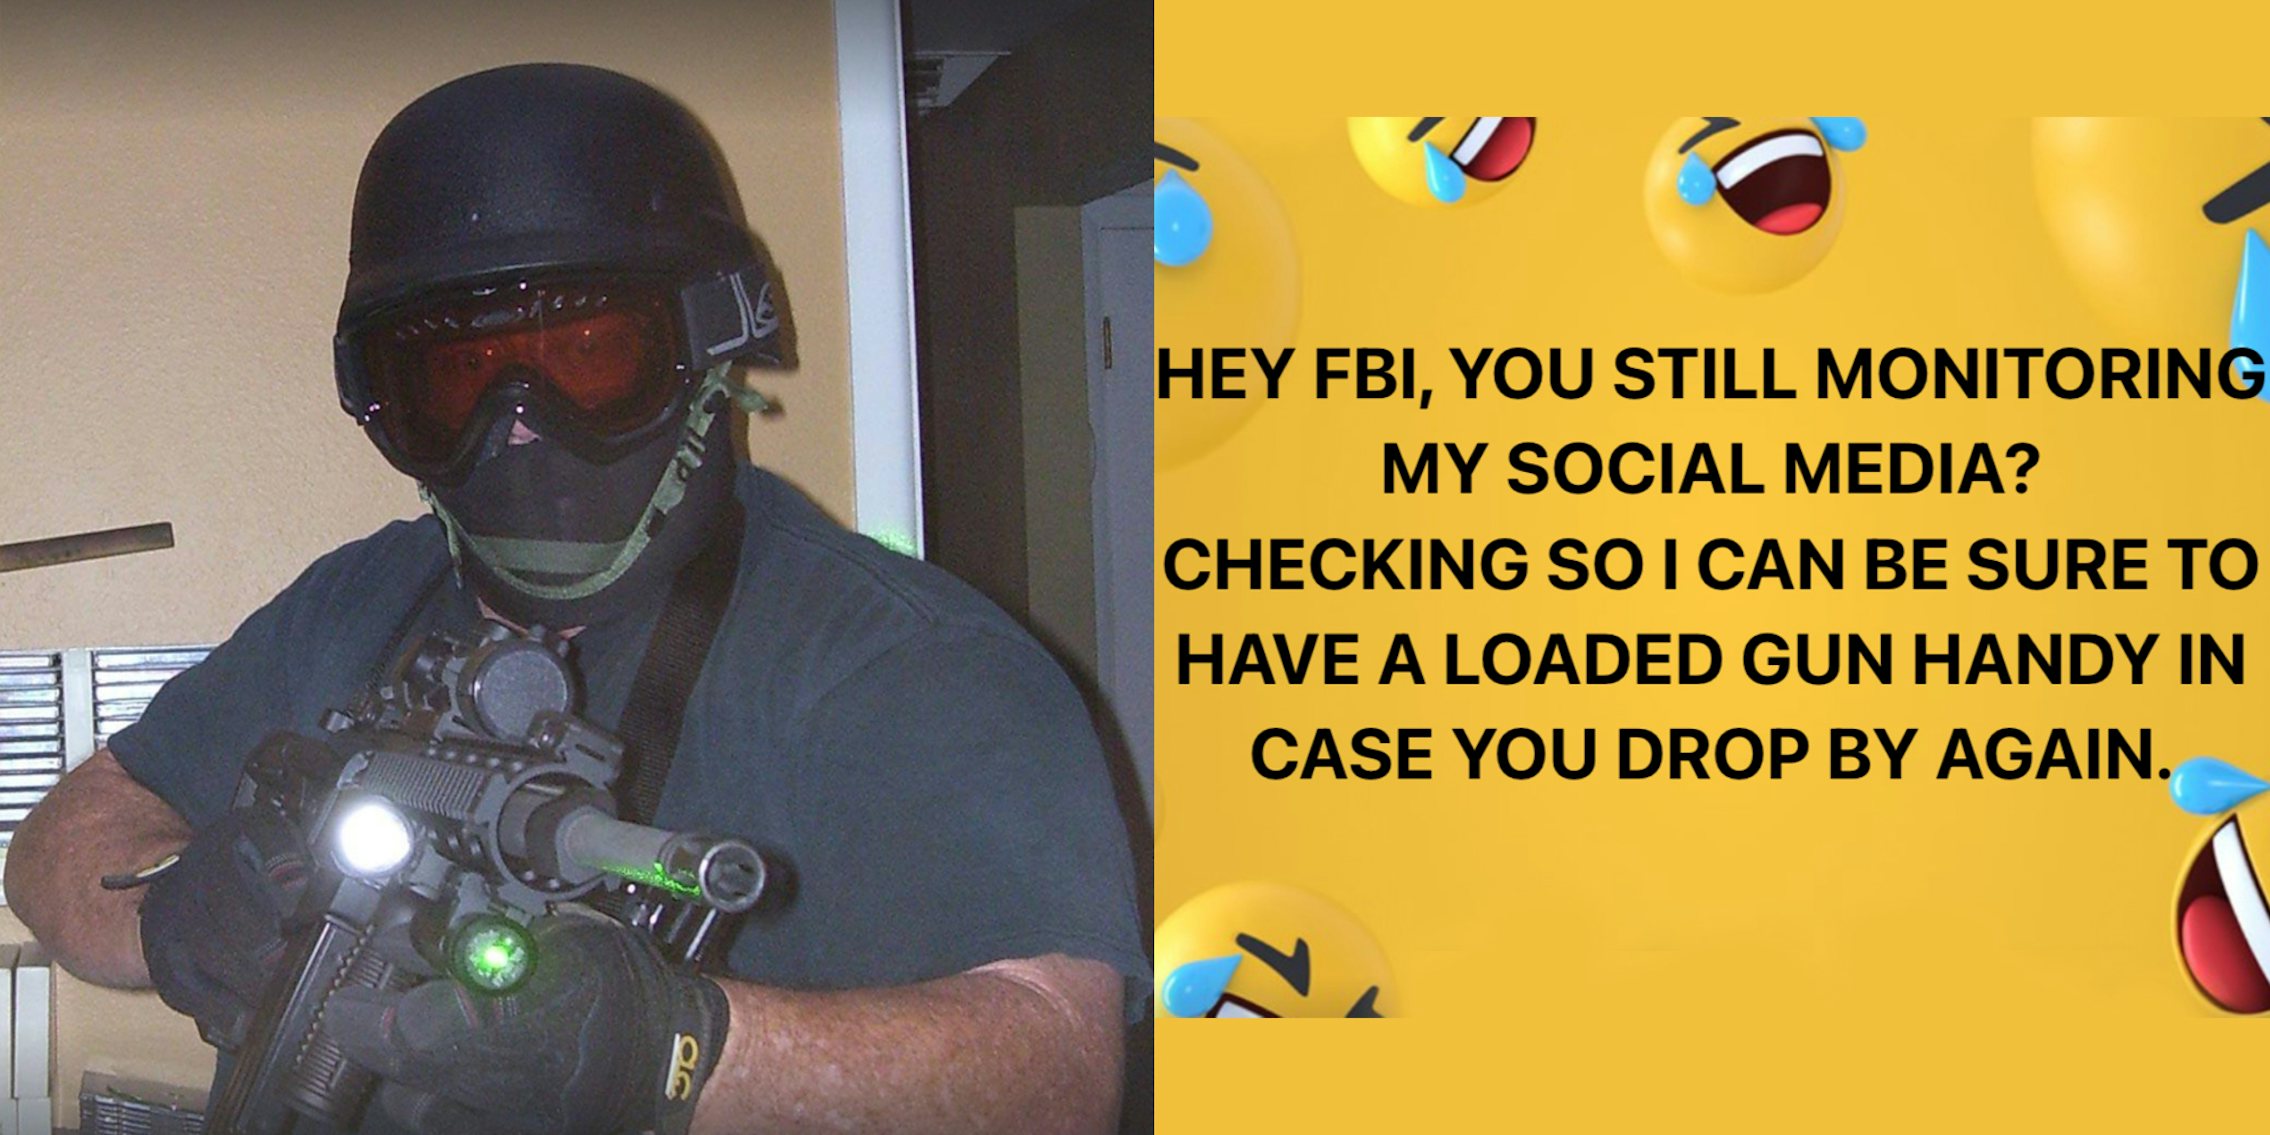 man with gun (l) Facebook meme on yellow laughing emoji background with caption 'HEY FBI, YOU STILL MONITORING MY SOCIAL MEDIA? CHECKING SO I CAN BE SURE TO HAVE A LOADED GUN HANDY CASE YOU DROP BY AGAIN' (r)